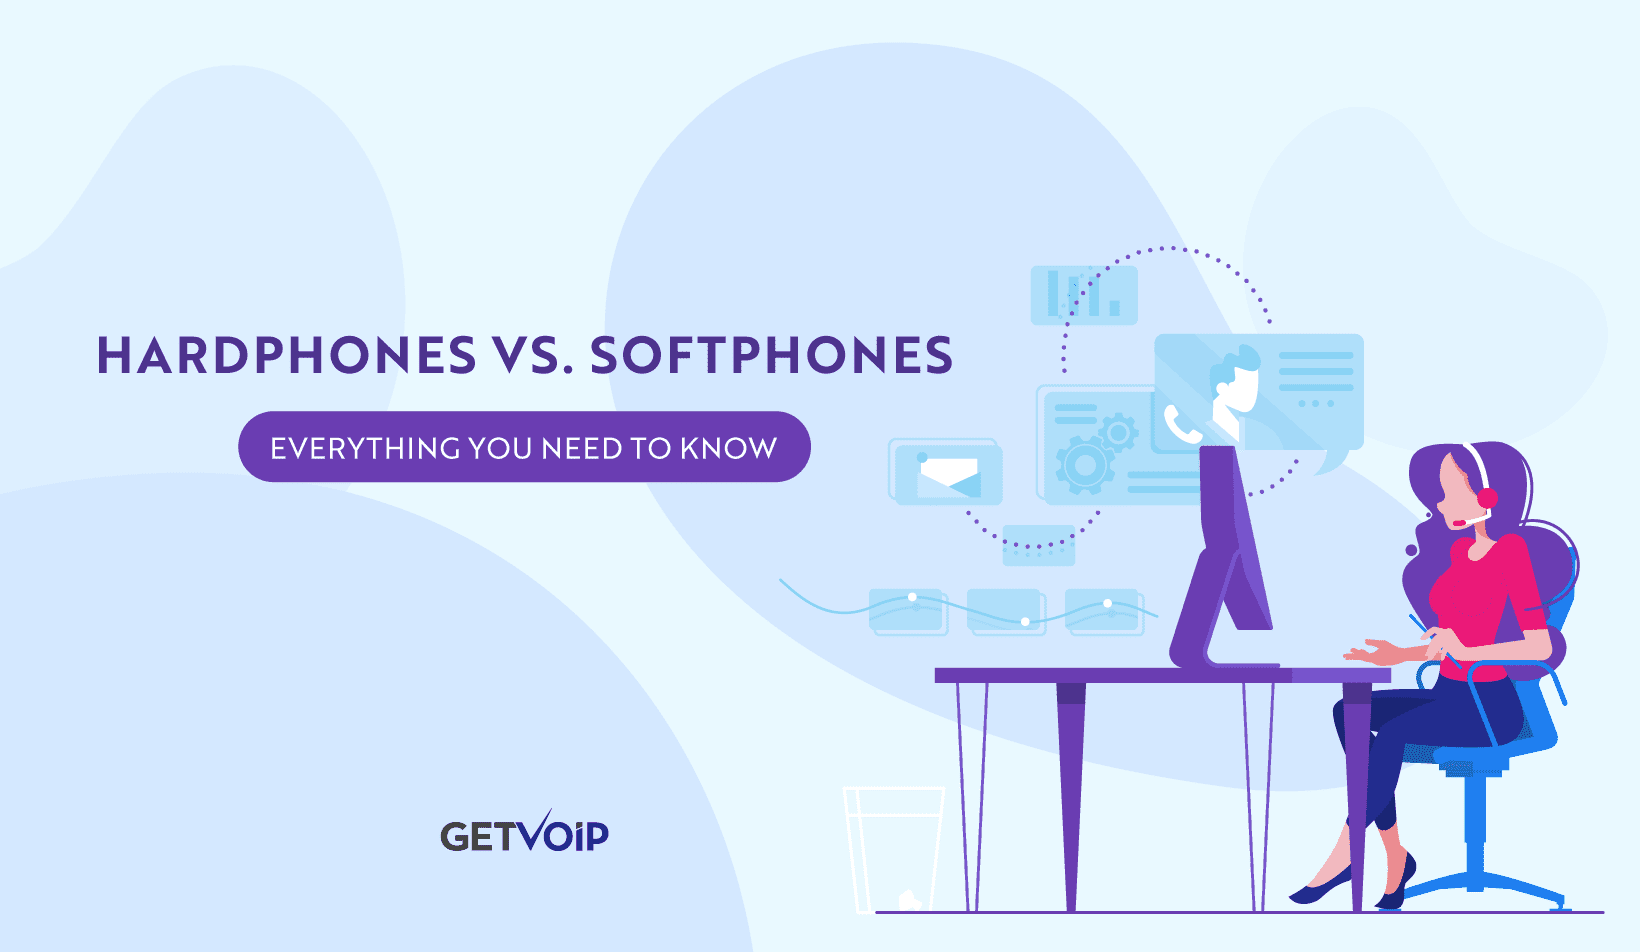 Hardphones vs. Softphones – Everything You Need to Know